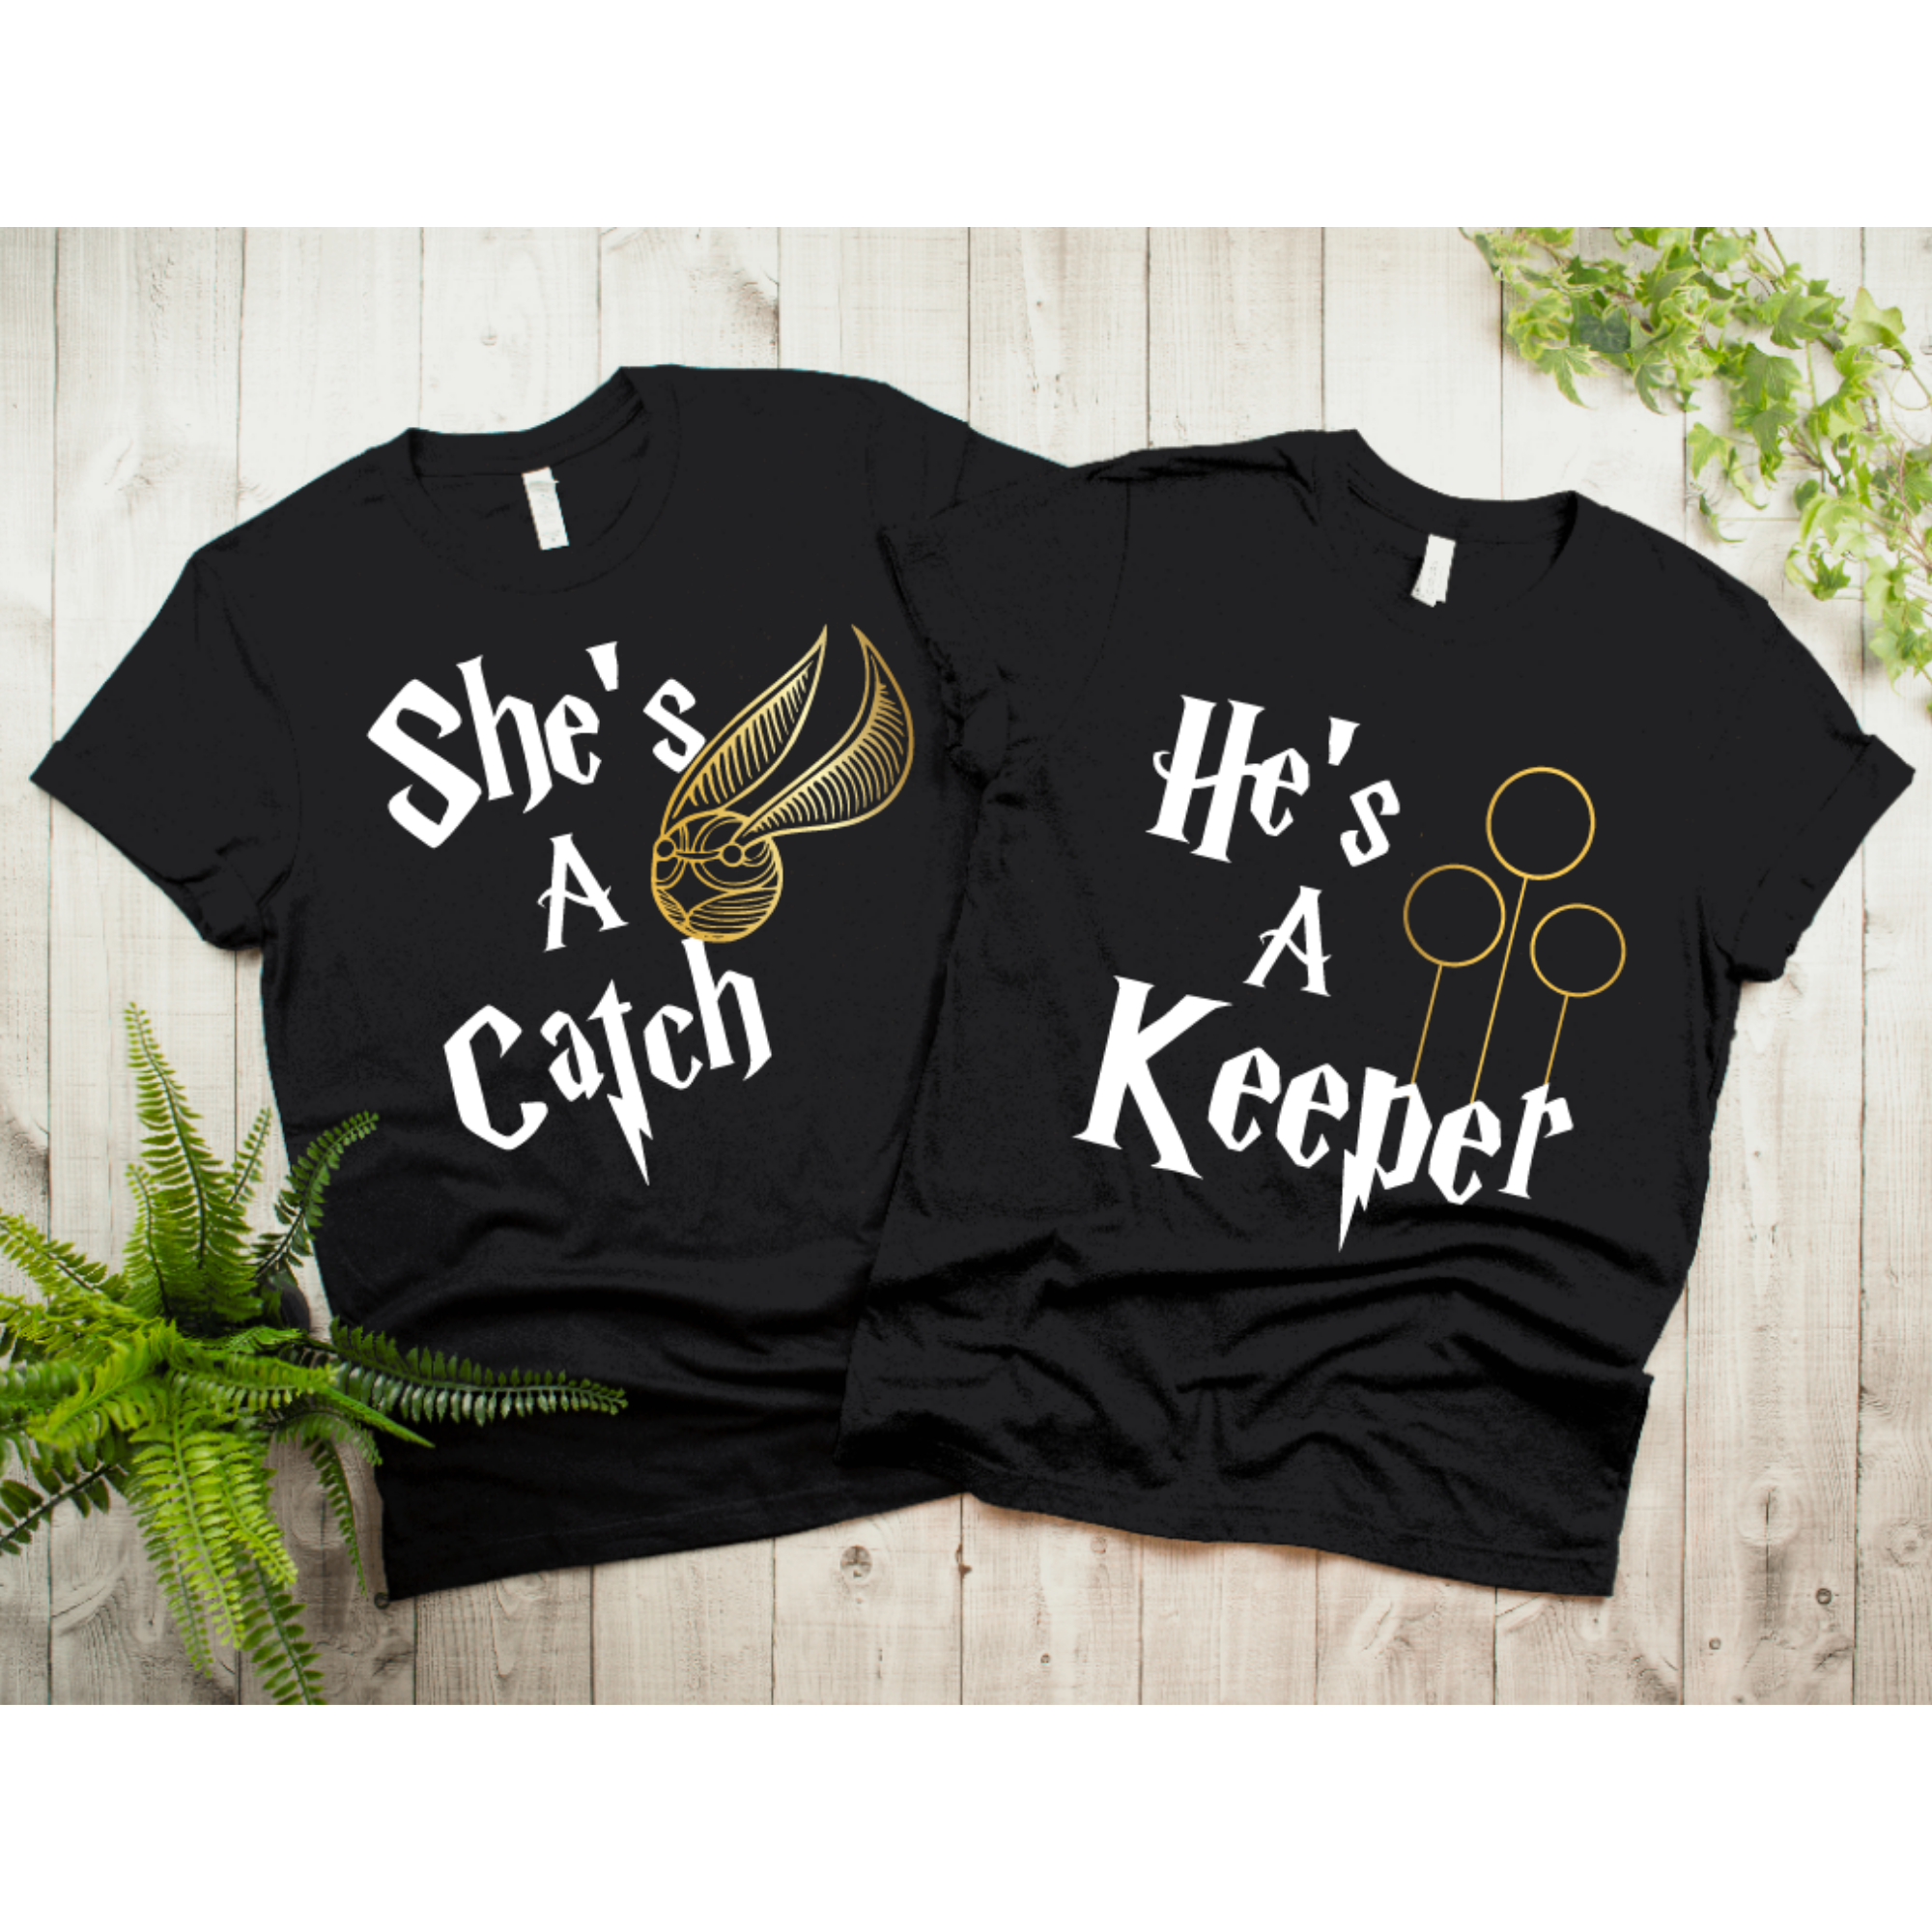 She’s A Catch He’s A Keeper: Matching Harry Potter Shirts for Couples or Mommy and Me Unisex Tee XL / Unisex Tee M